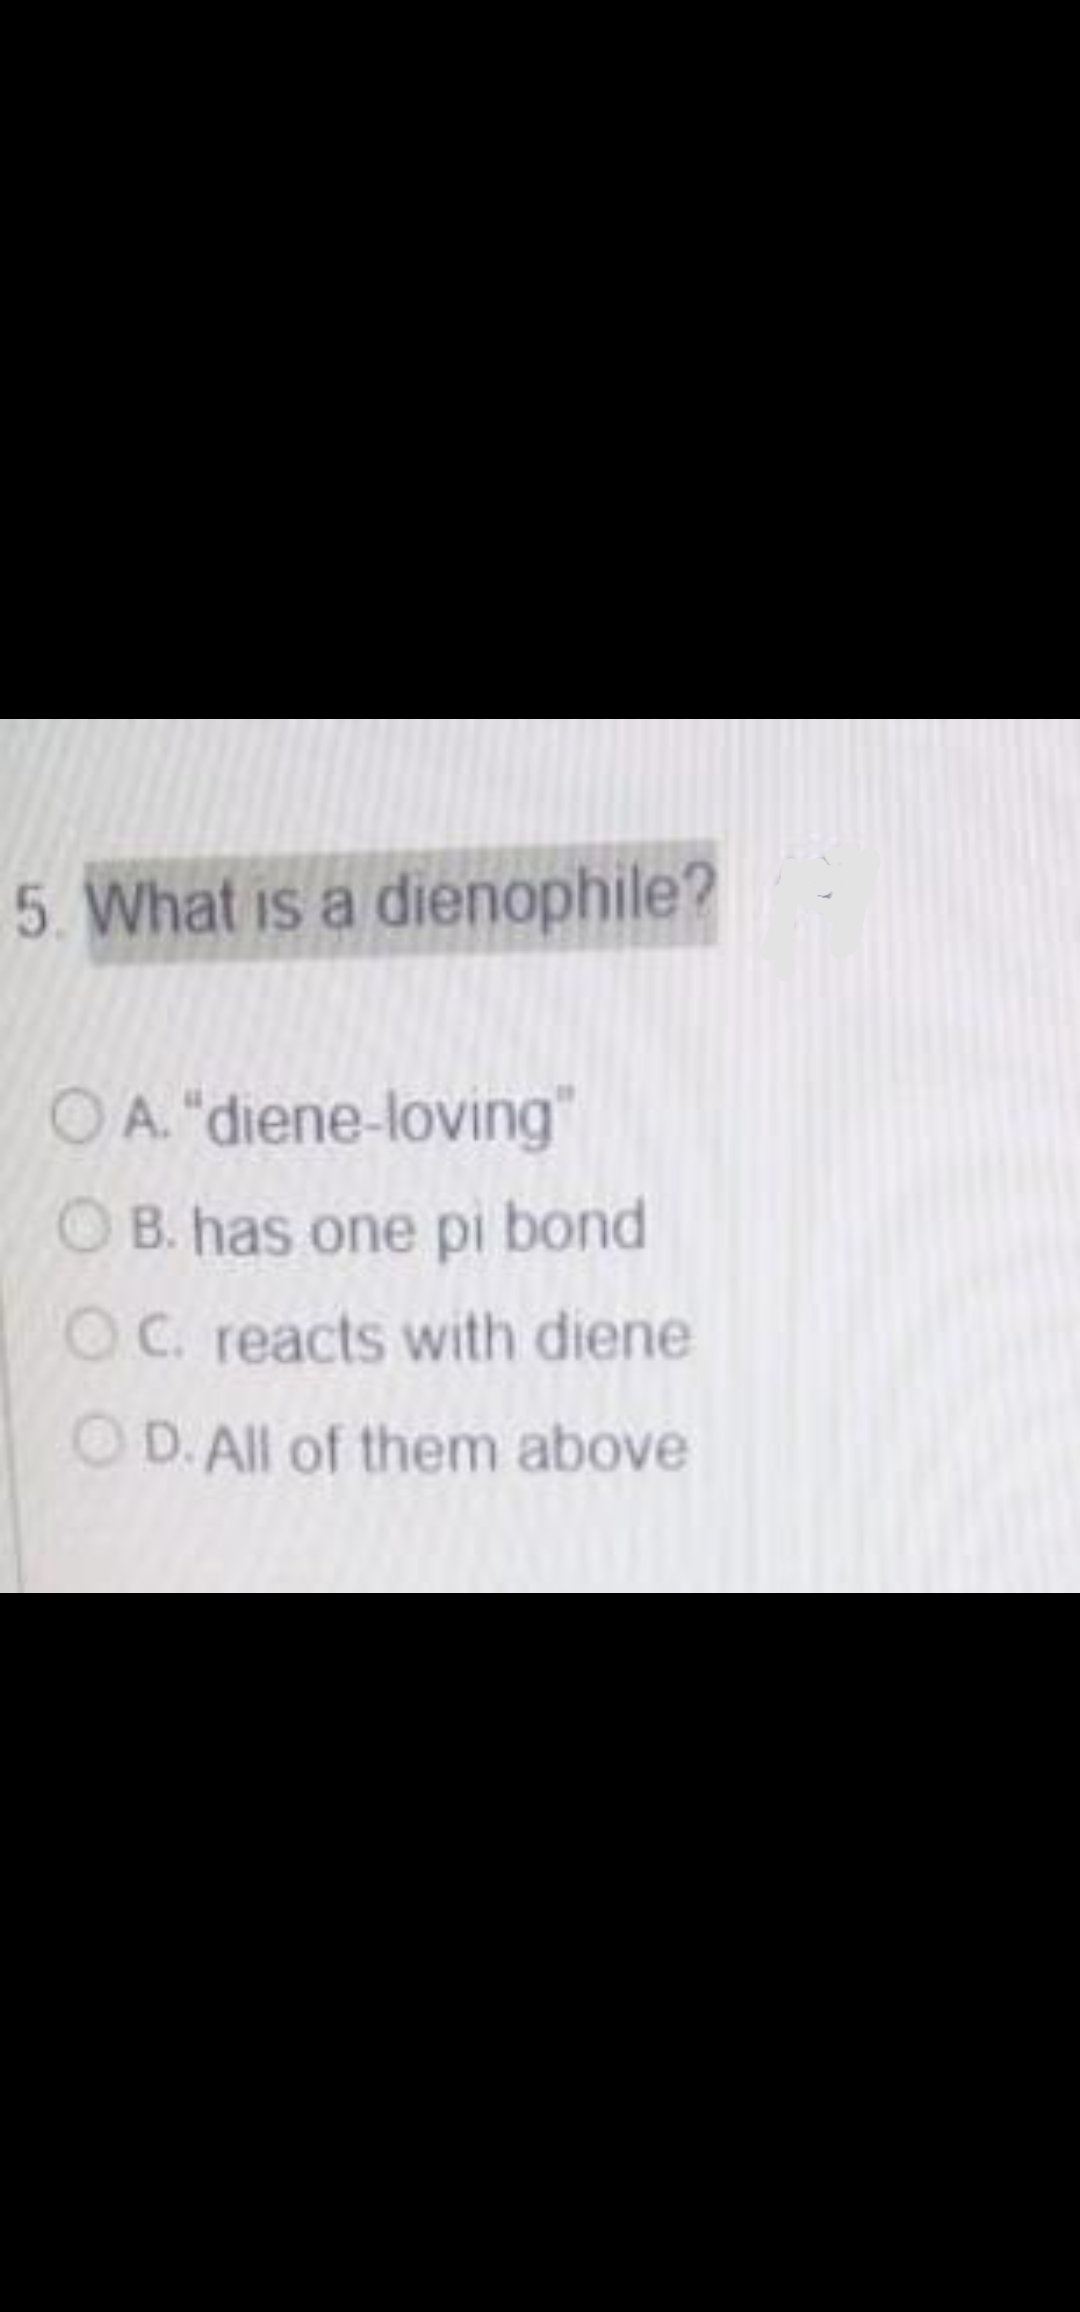 5. What is a dienophile?
OA. "diene-loving"
O B. has one pi bond
OC. reacts with diene
O D. All of them above
